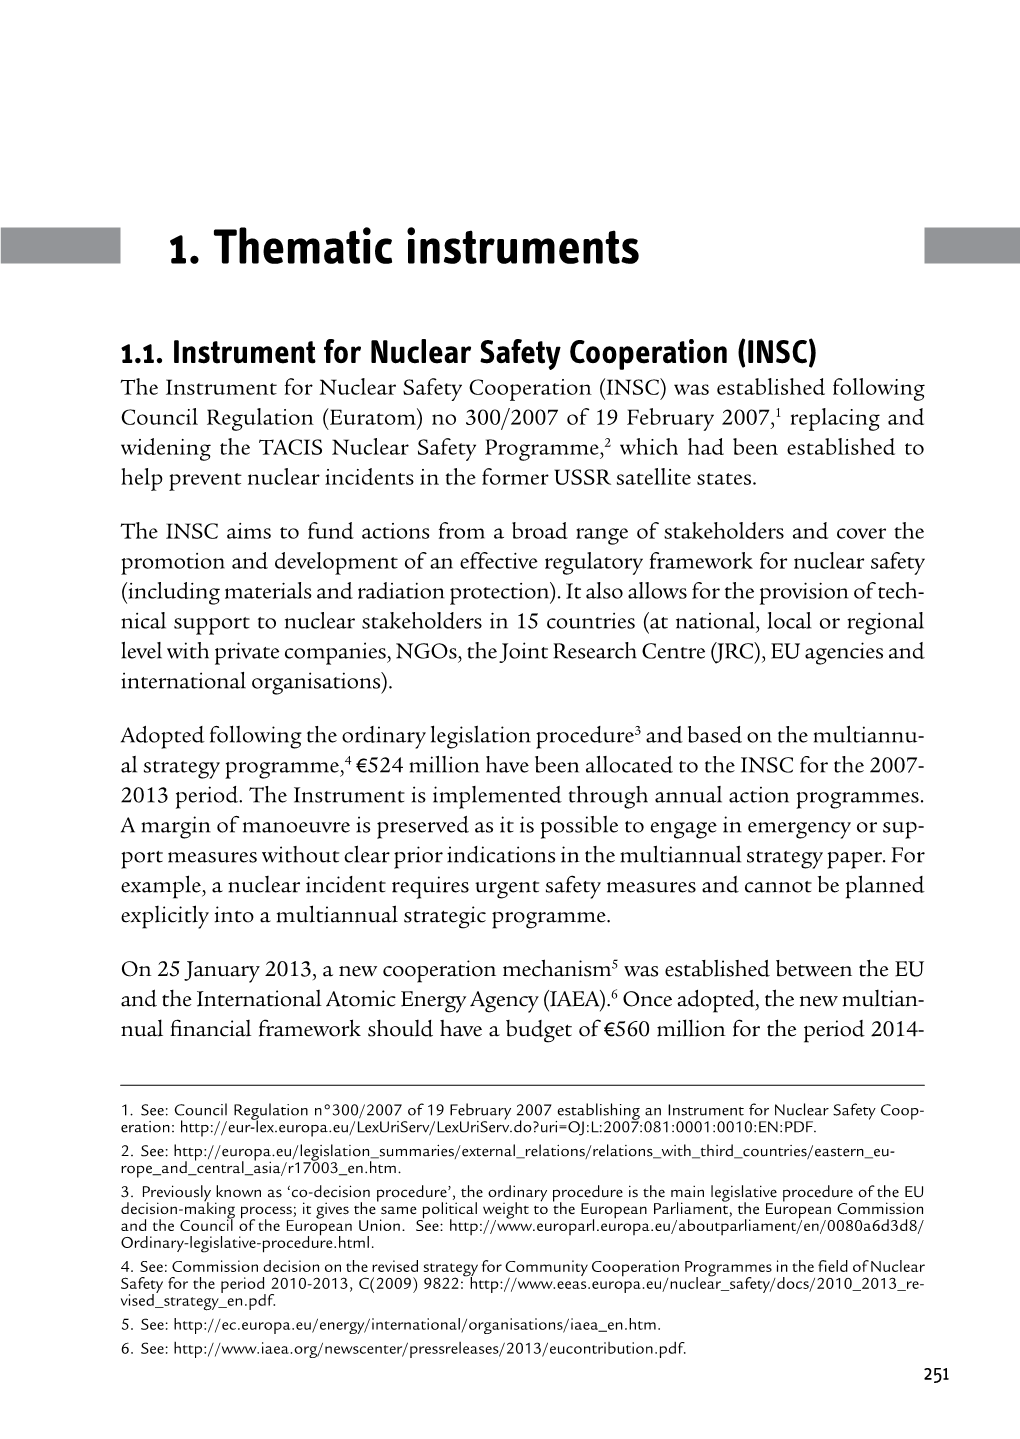 1. Thematic Instruments